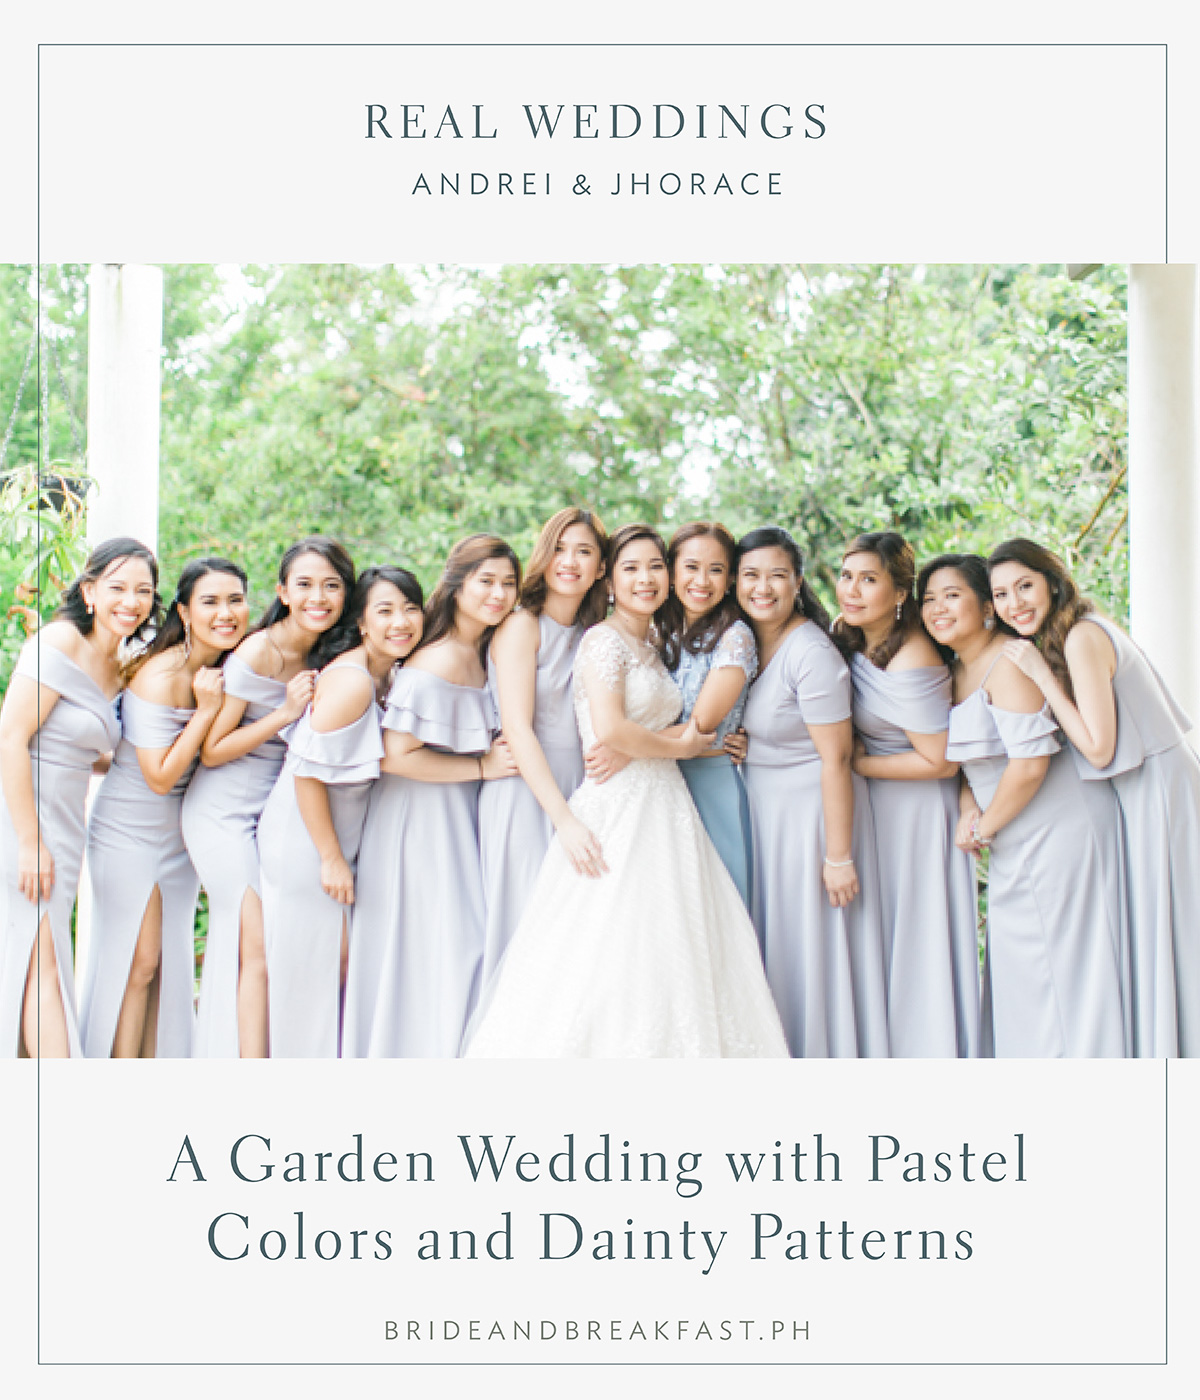 A Garden Wedding with Pastel Colors and Dainty Patterns